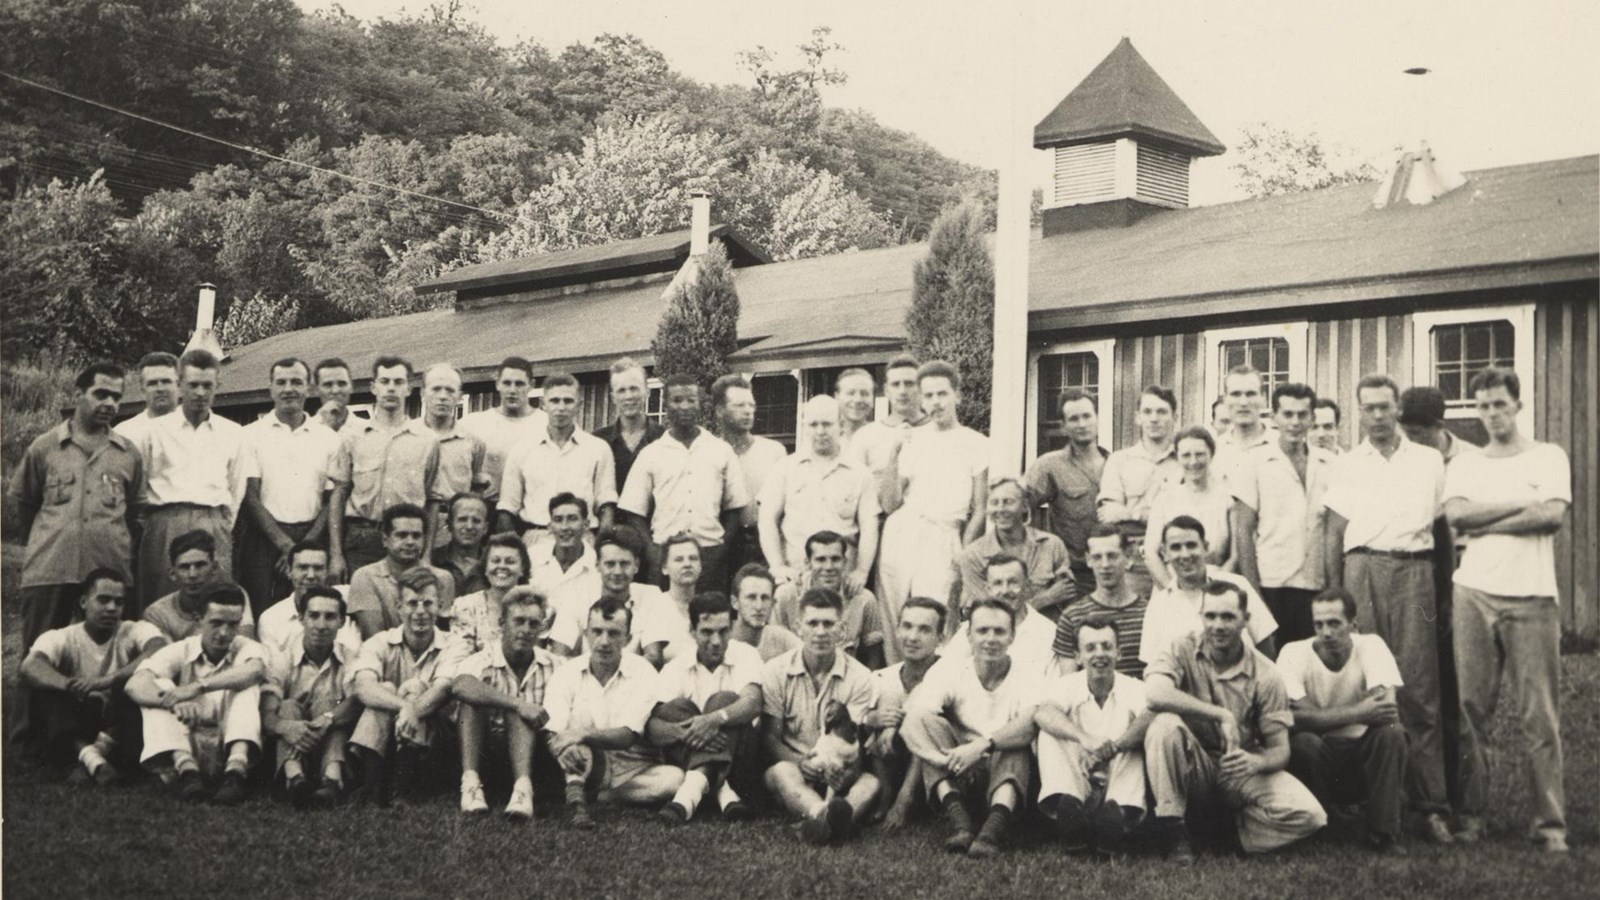 Group photo of about fifty people, mostly men, standing outside in front of a building and trees.